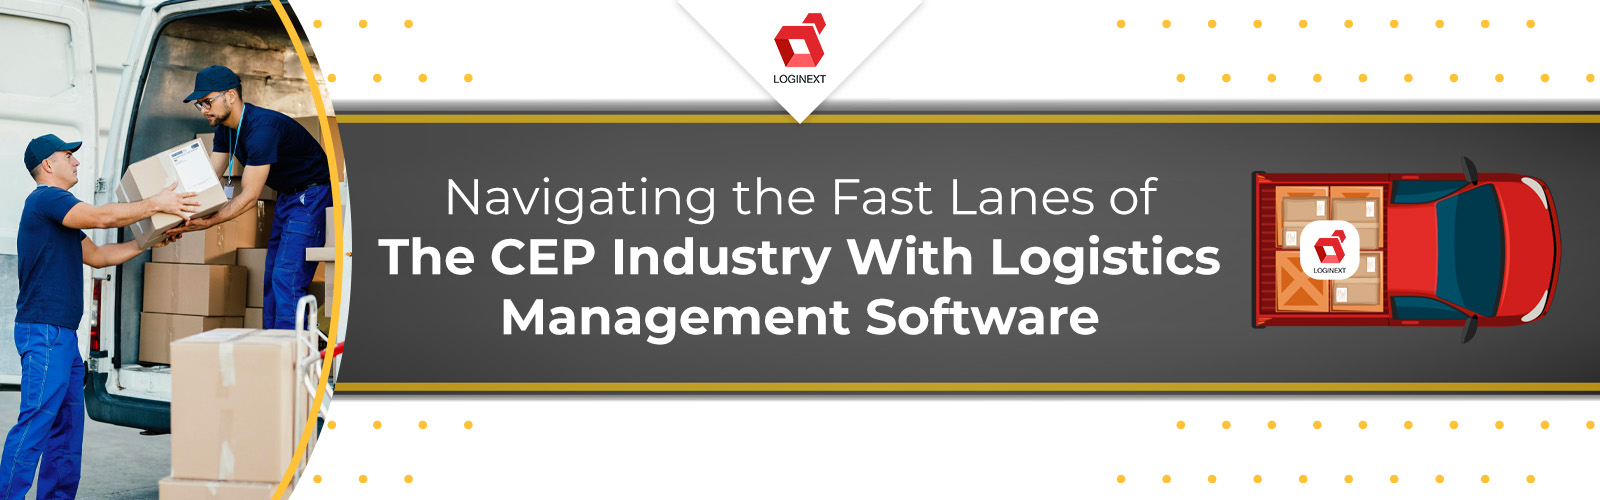 Enhancing CEP Industry With Logistics Management Software